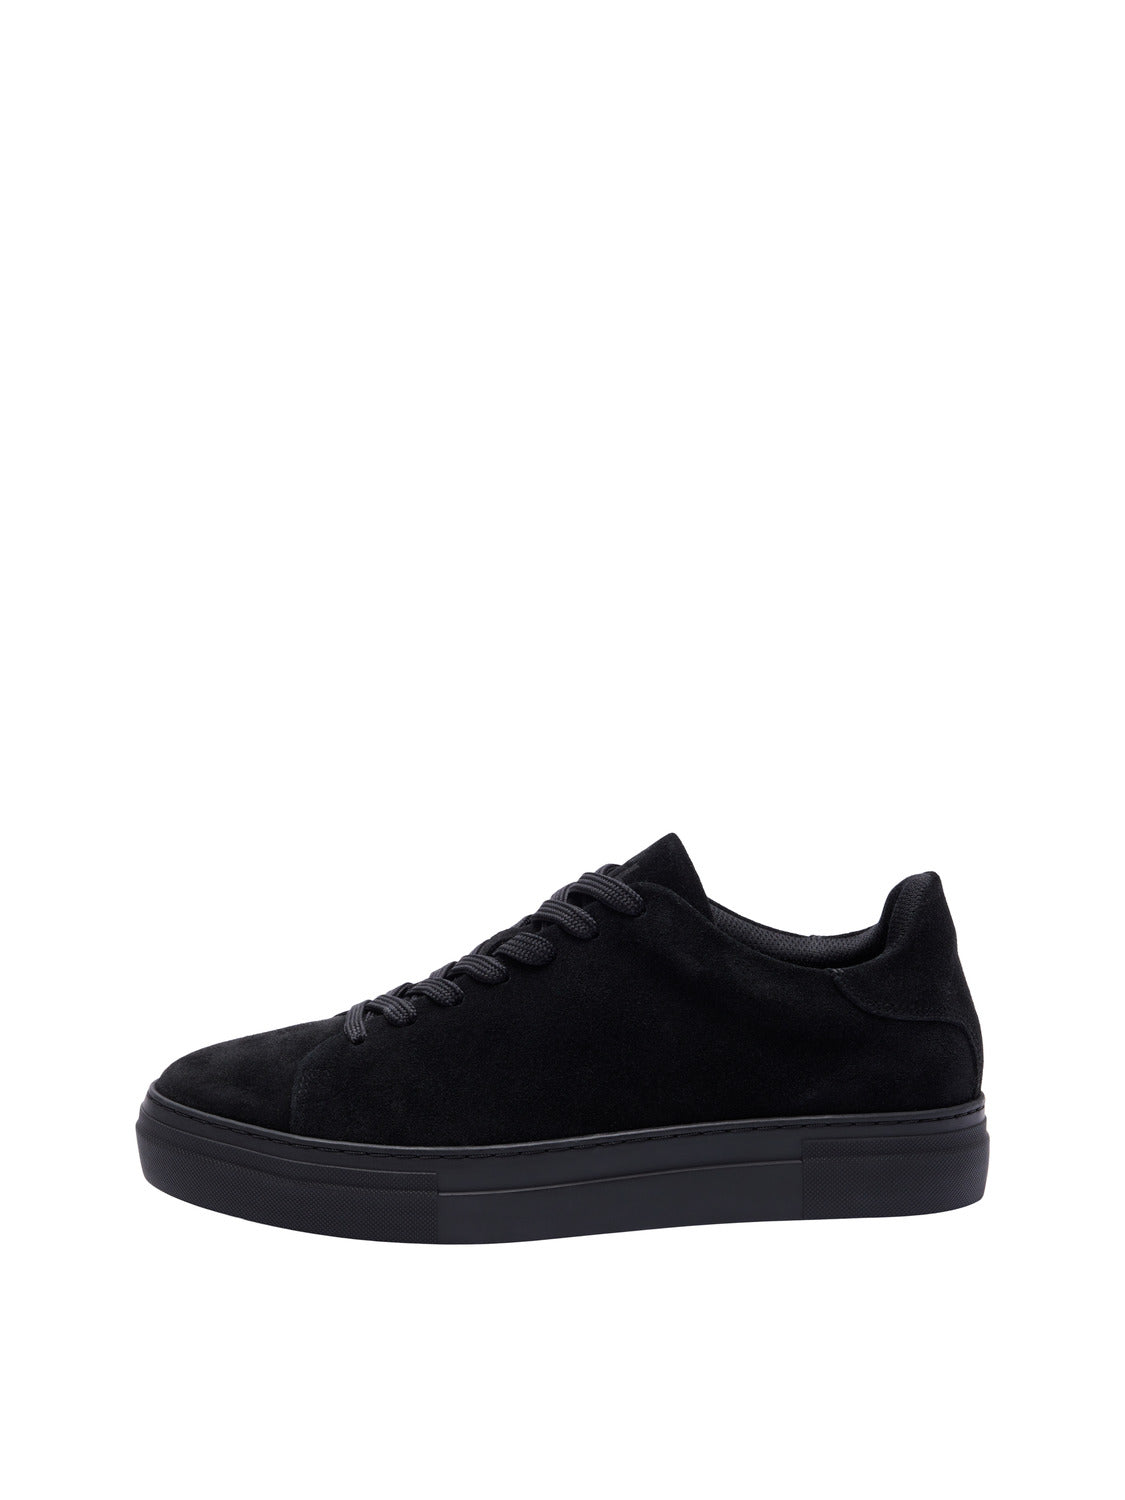 SELECTED HOMME - DAVID Shoes - Black